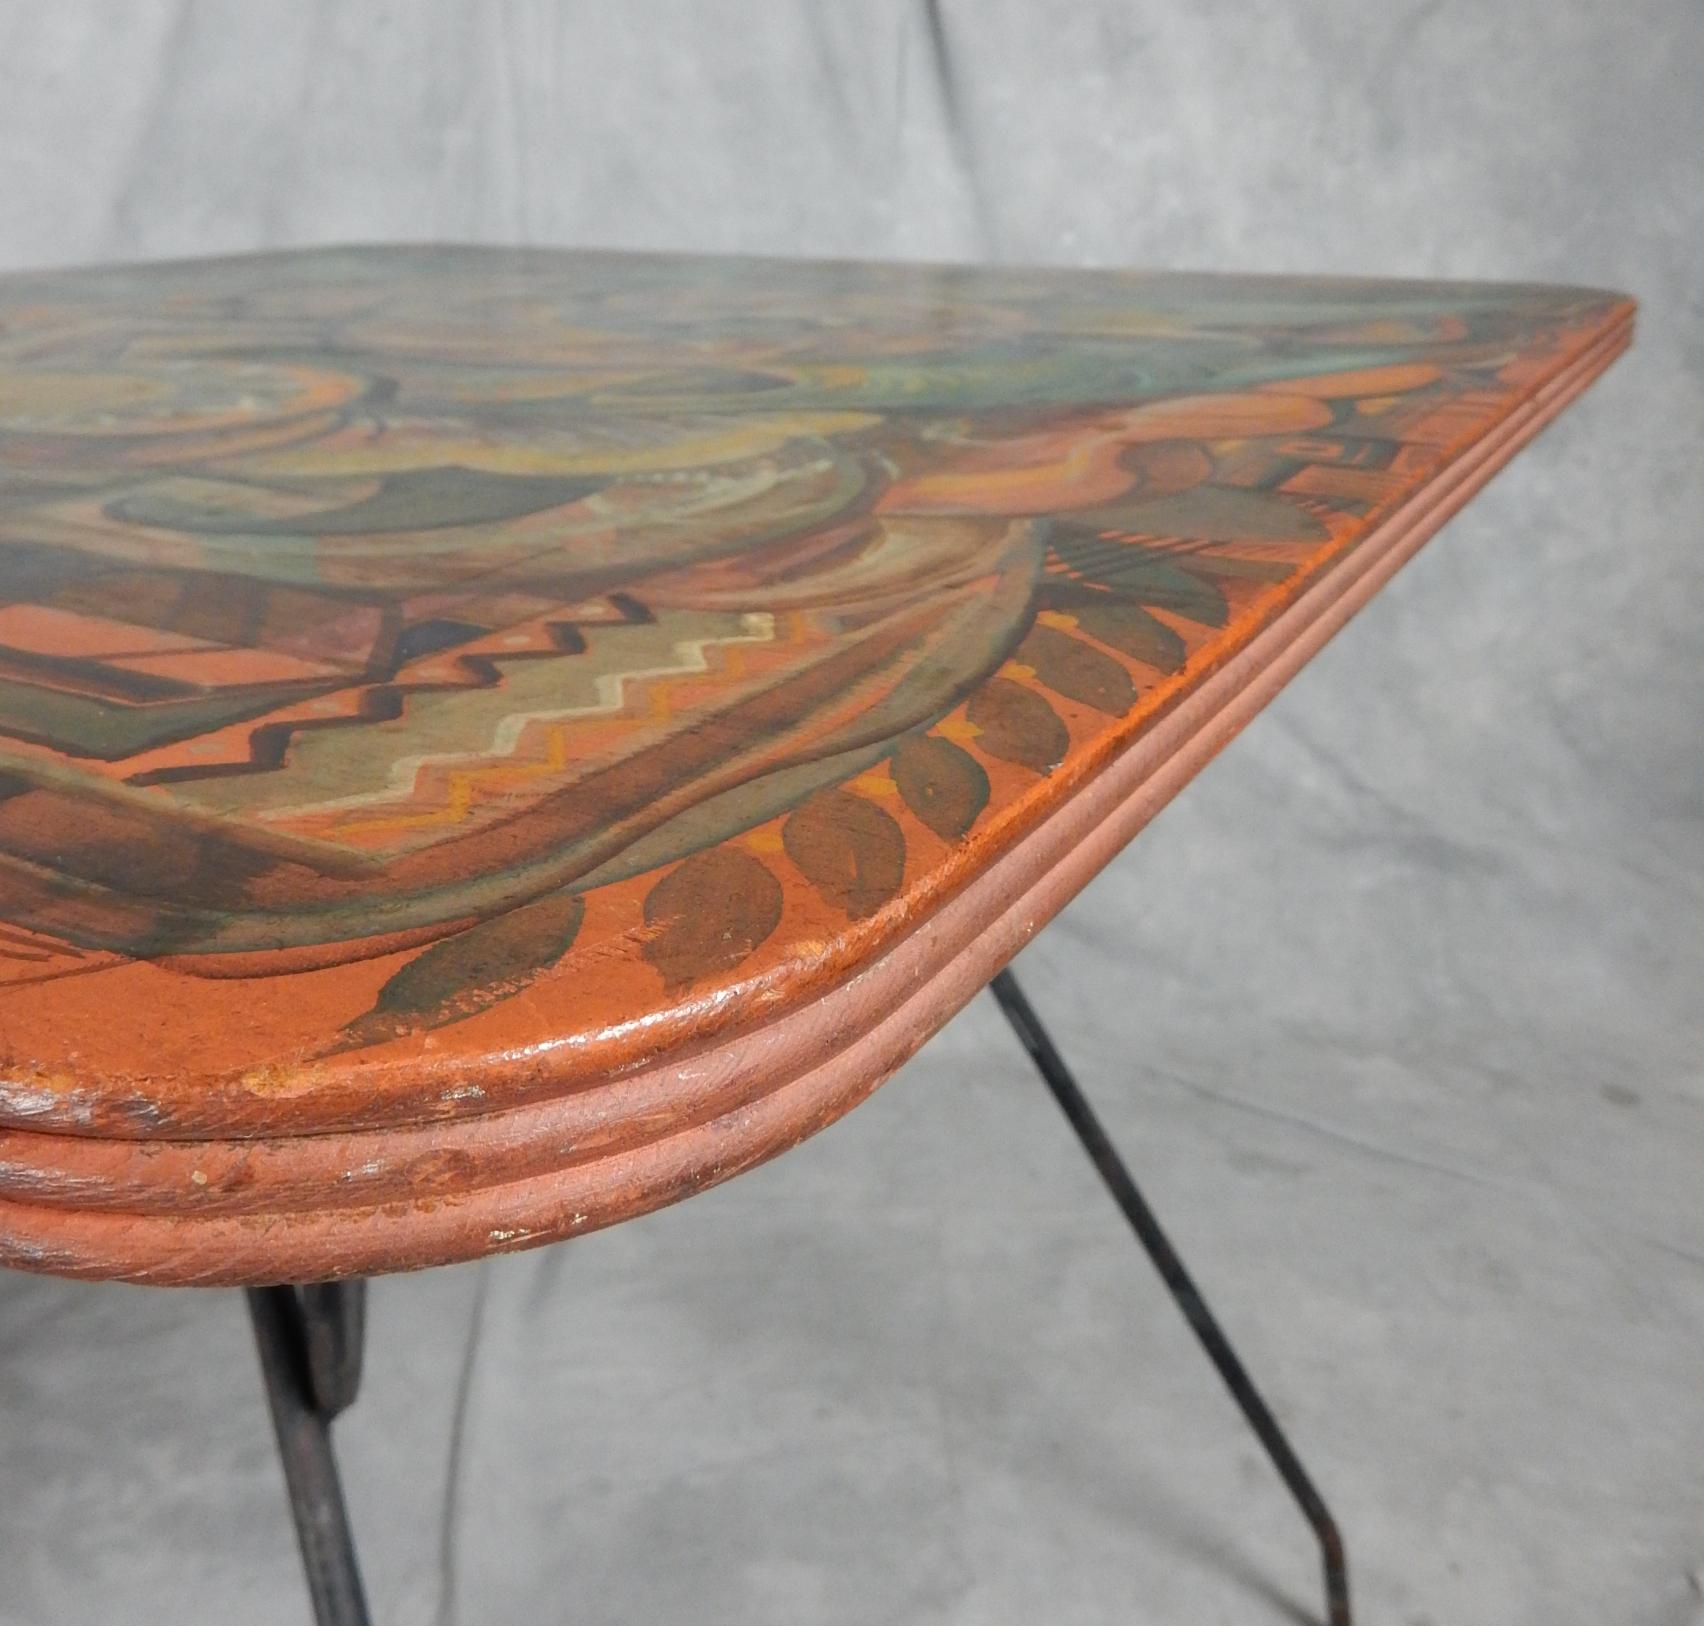  Early 20th-Century Avant-Garde Painted Table with Mexican Muralism Painting For Sale 2